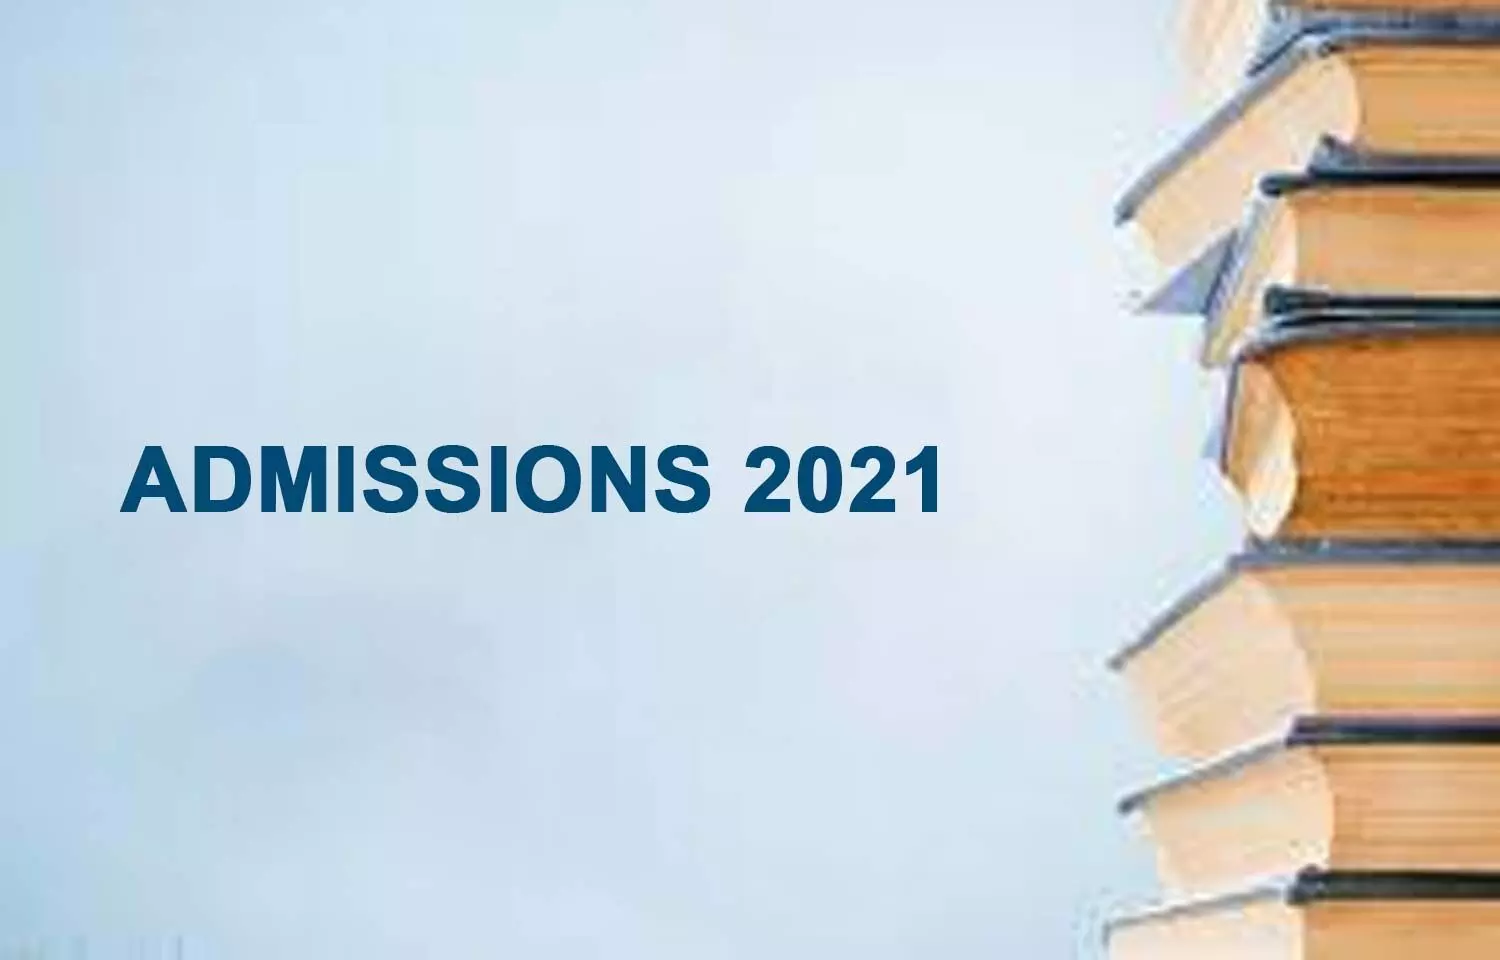 Apply Now for MBBS 2021 at Christian Medical College, CMC Vellore, View all admission details here